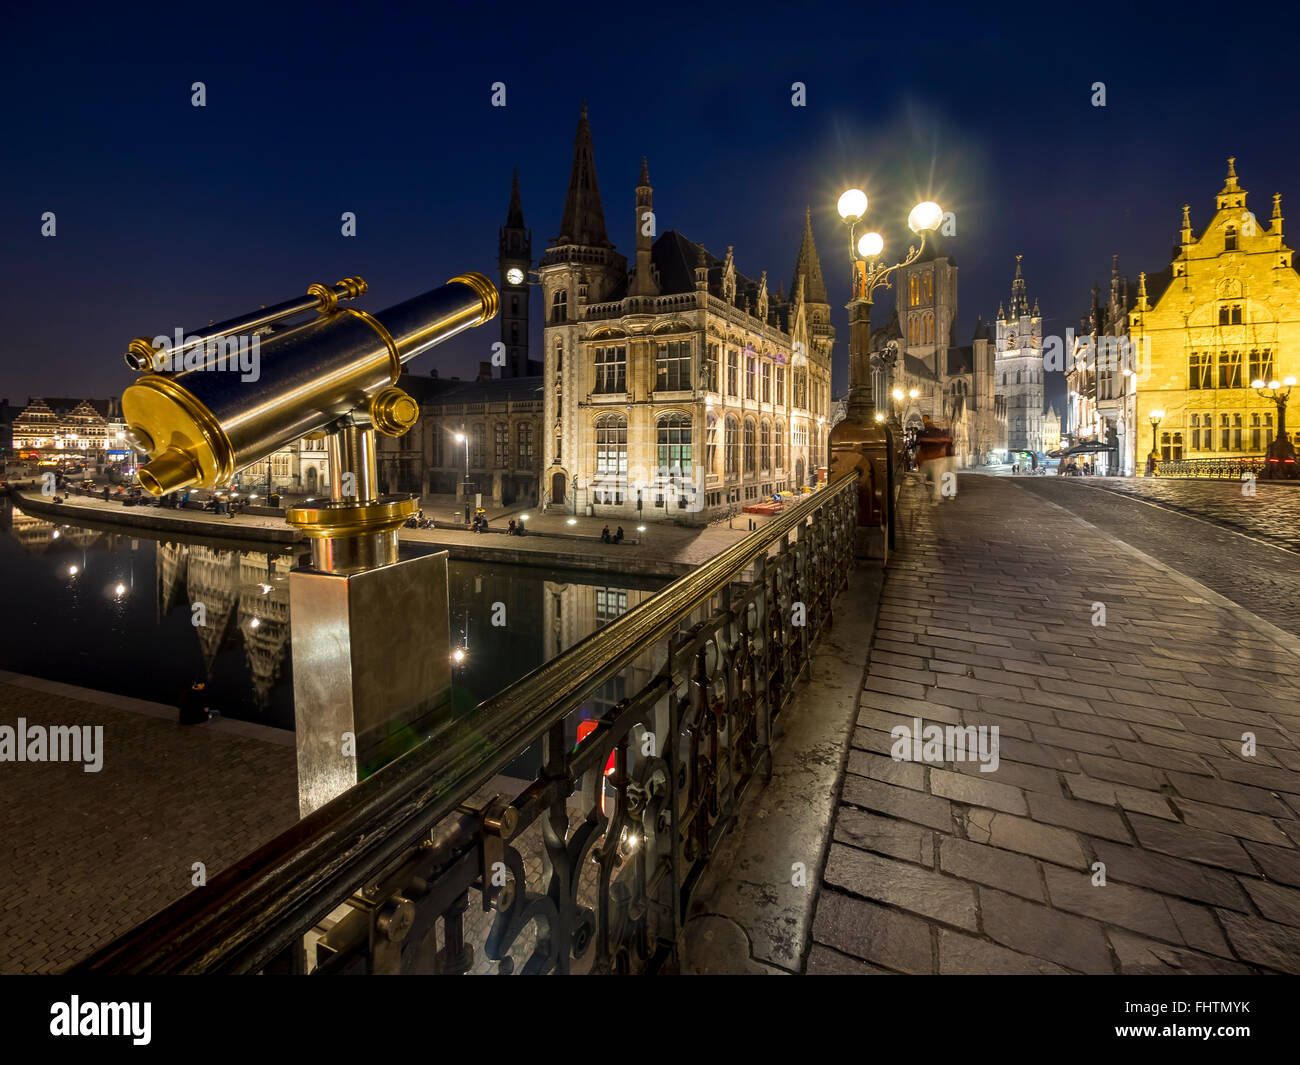 Belgium, Ghent, view from St. Michael Bridge to old town with St. Nicholas' Church and belfry at night Stock Photo